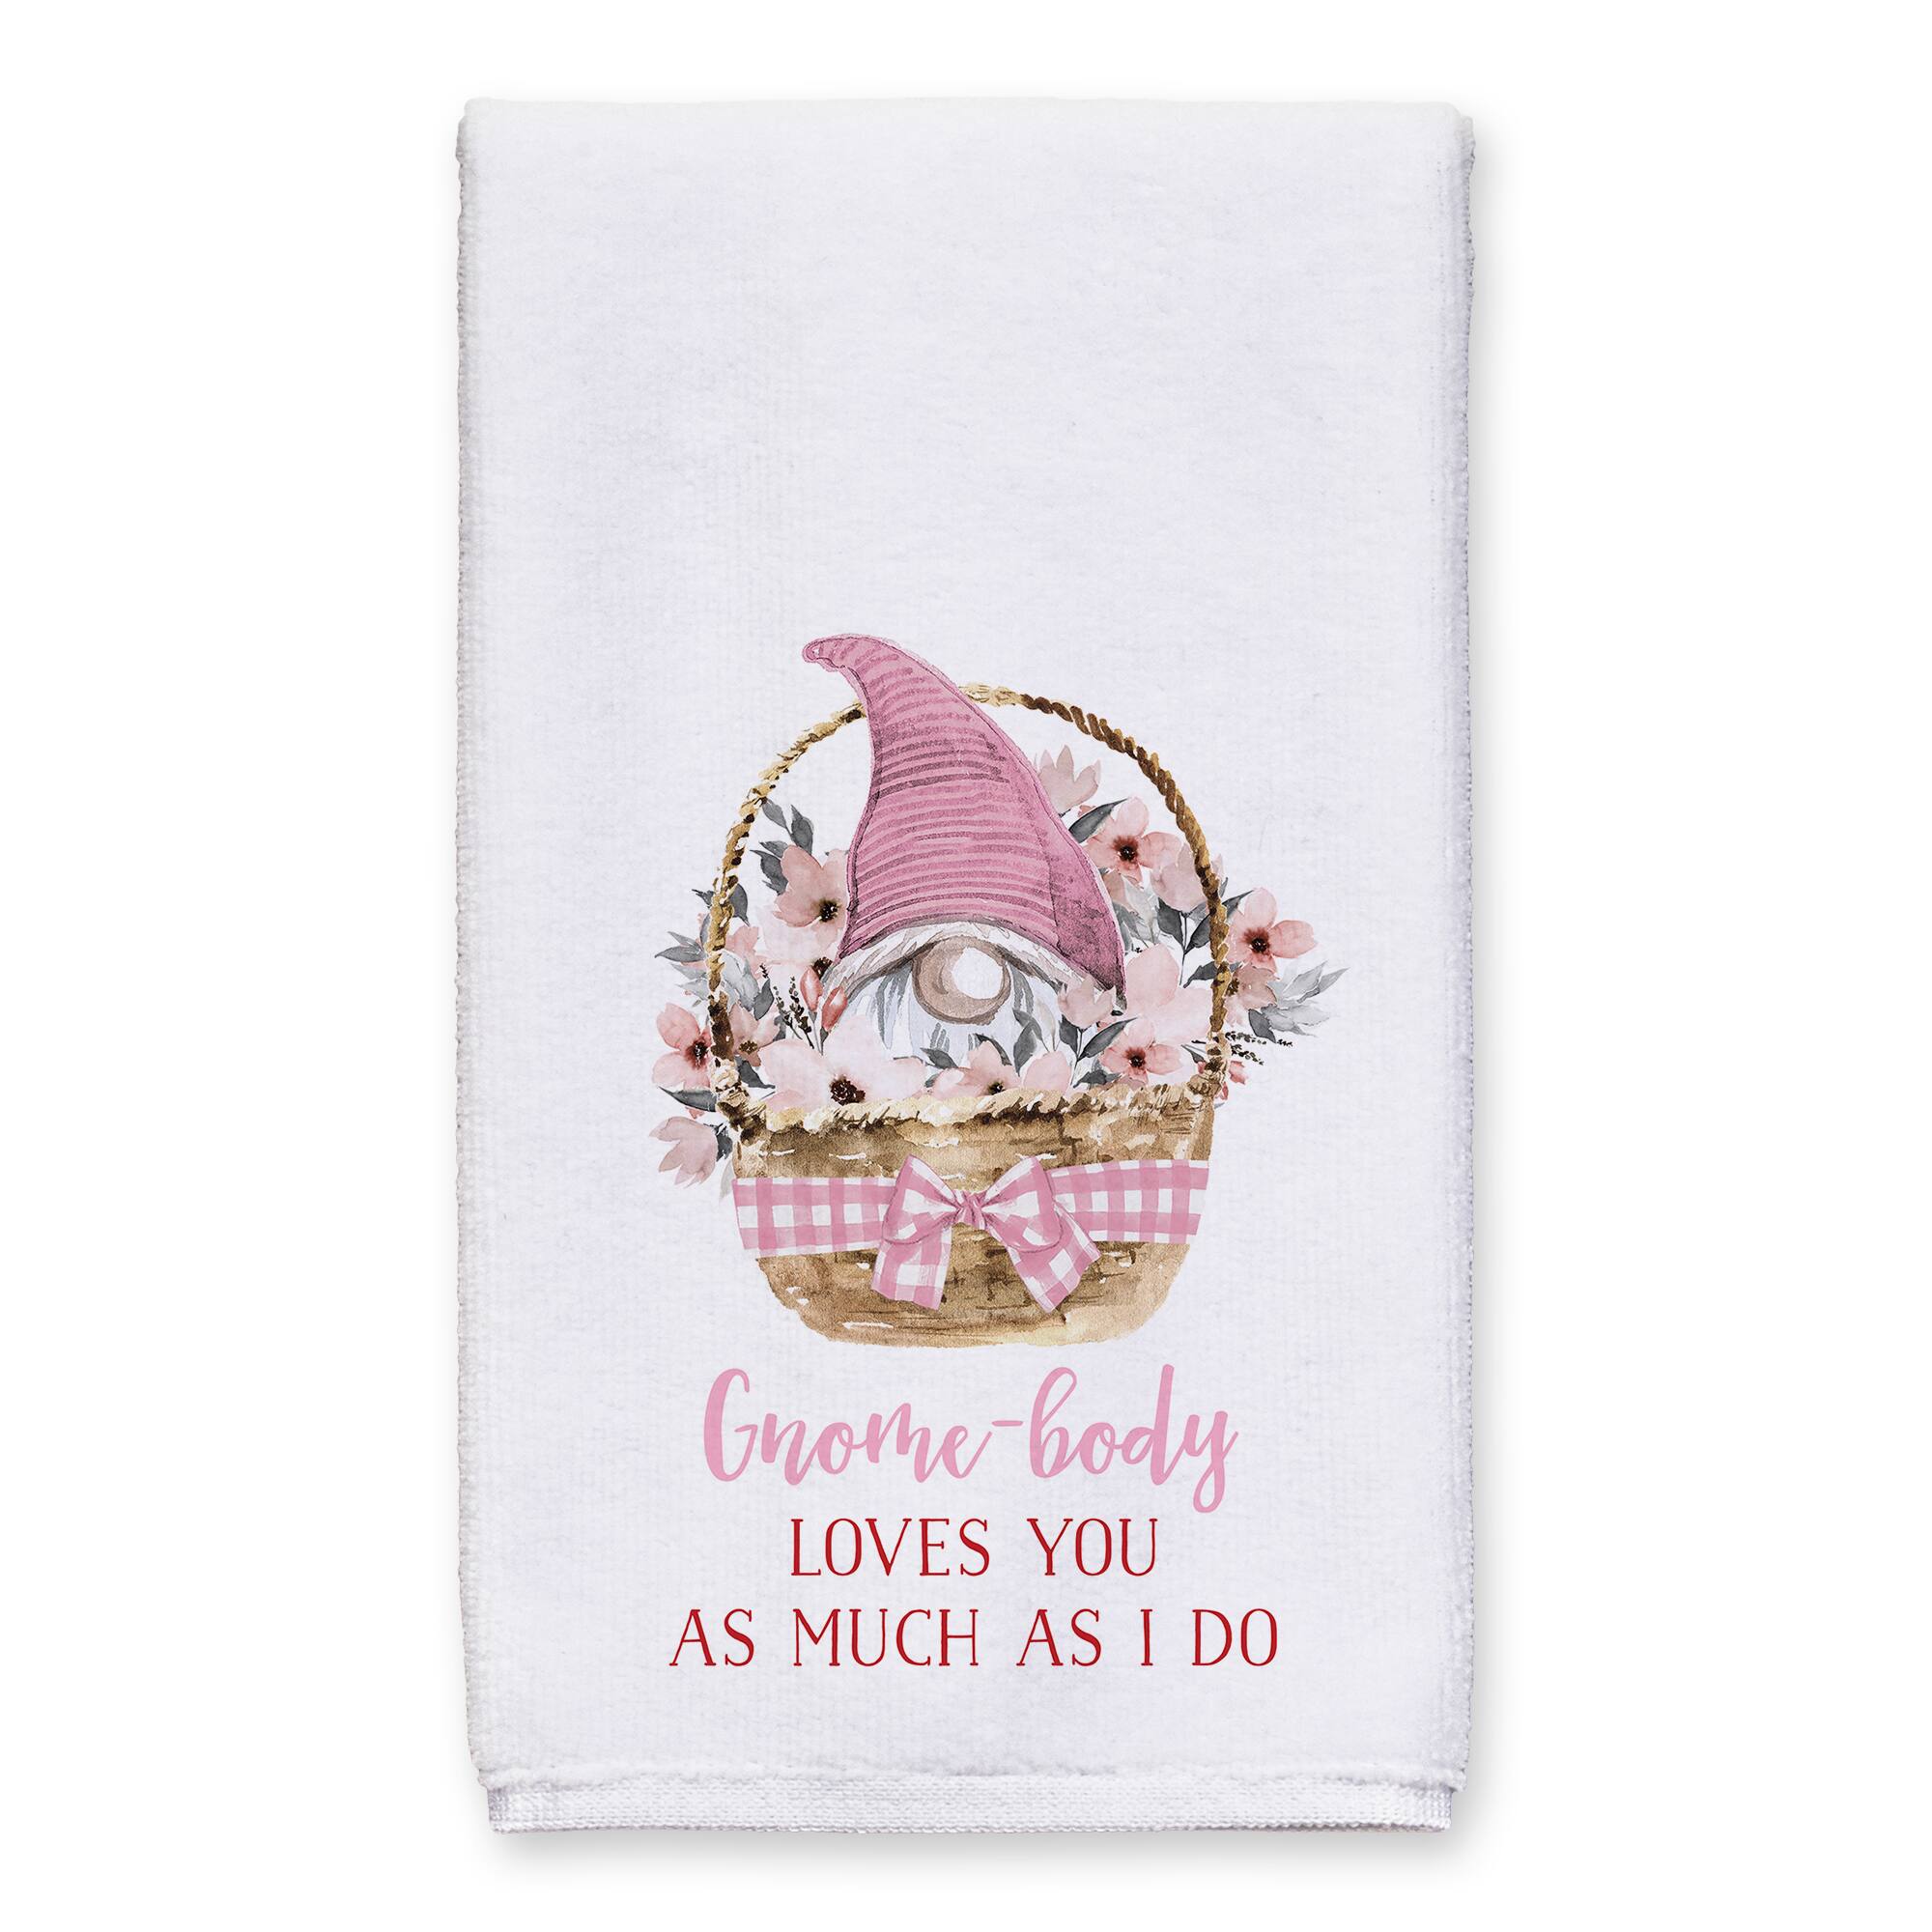 Gnome-body Loves You As Much As I Do Tea Towel Set